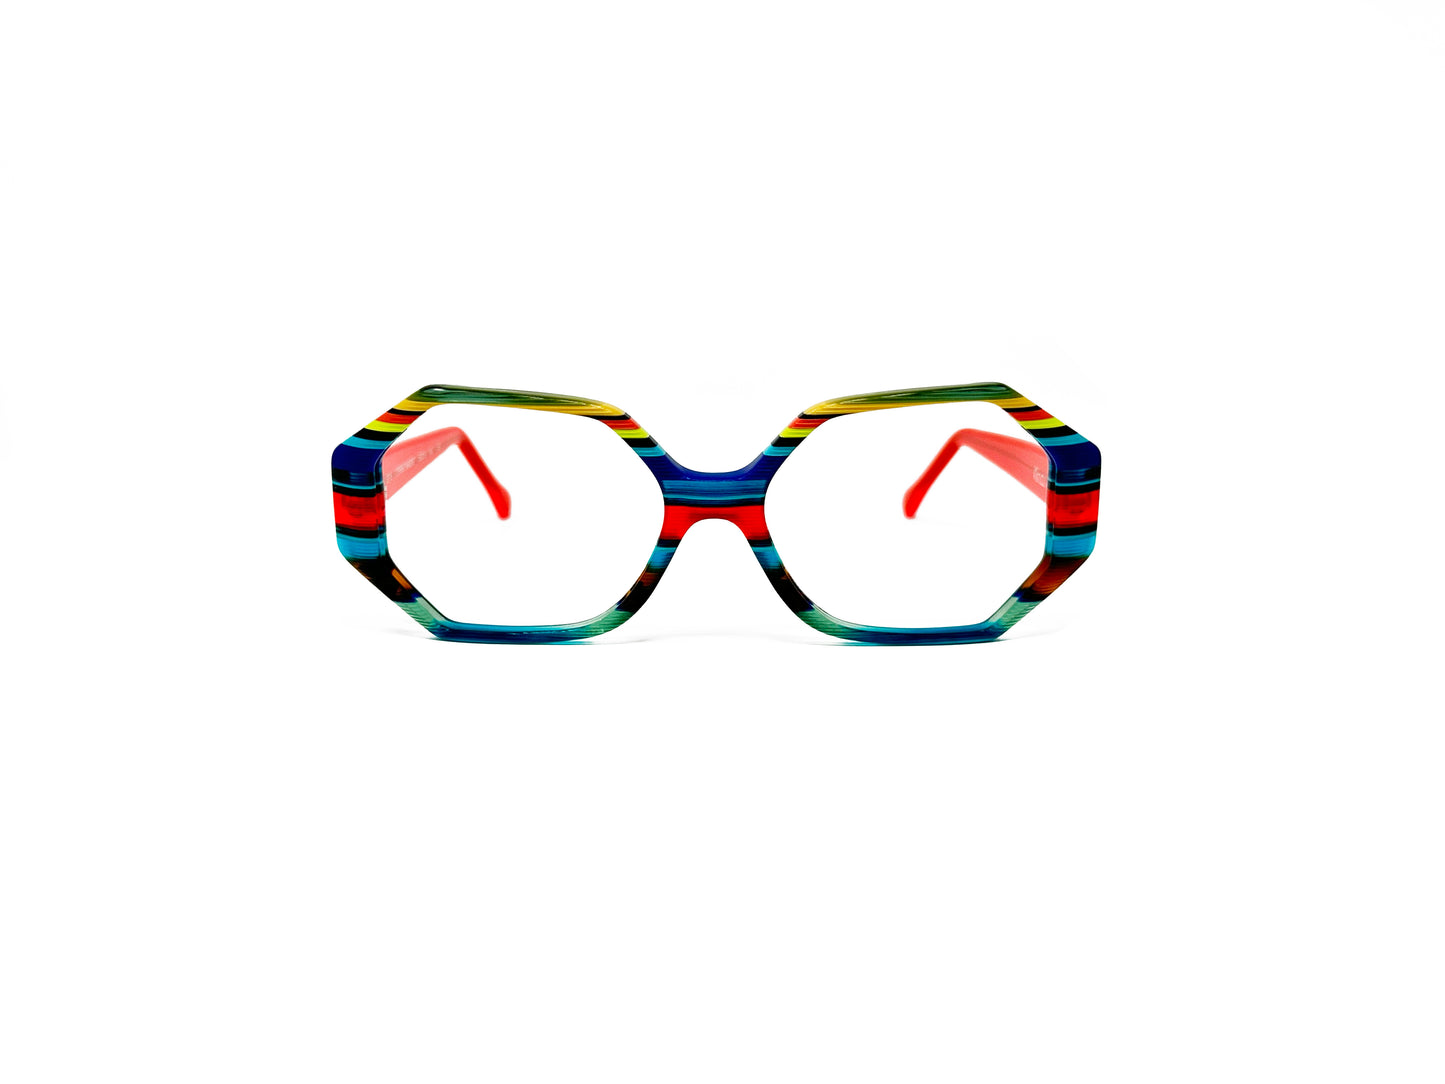 Viktlos rectangular heptagon shaped acetate optical frame. Model: 3318. Color: 1759RE87 - Multi-colored blue, red, green, and yellow stripes. Front view. 